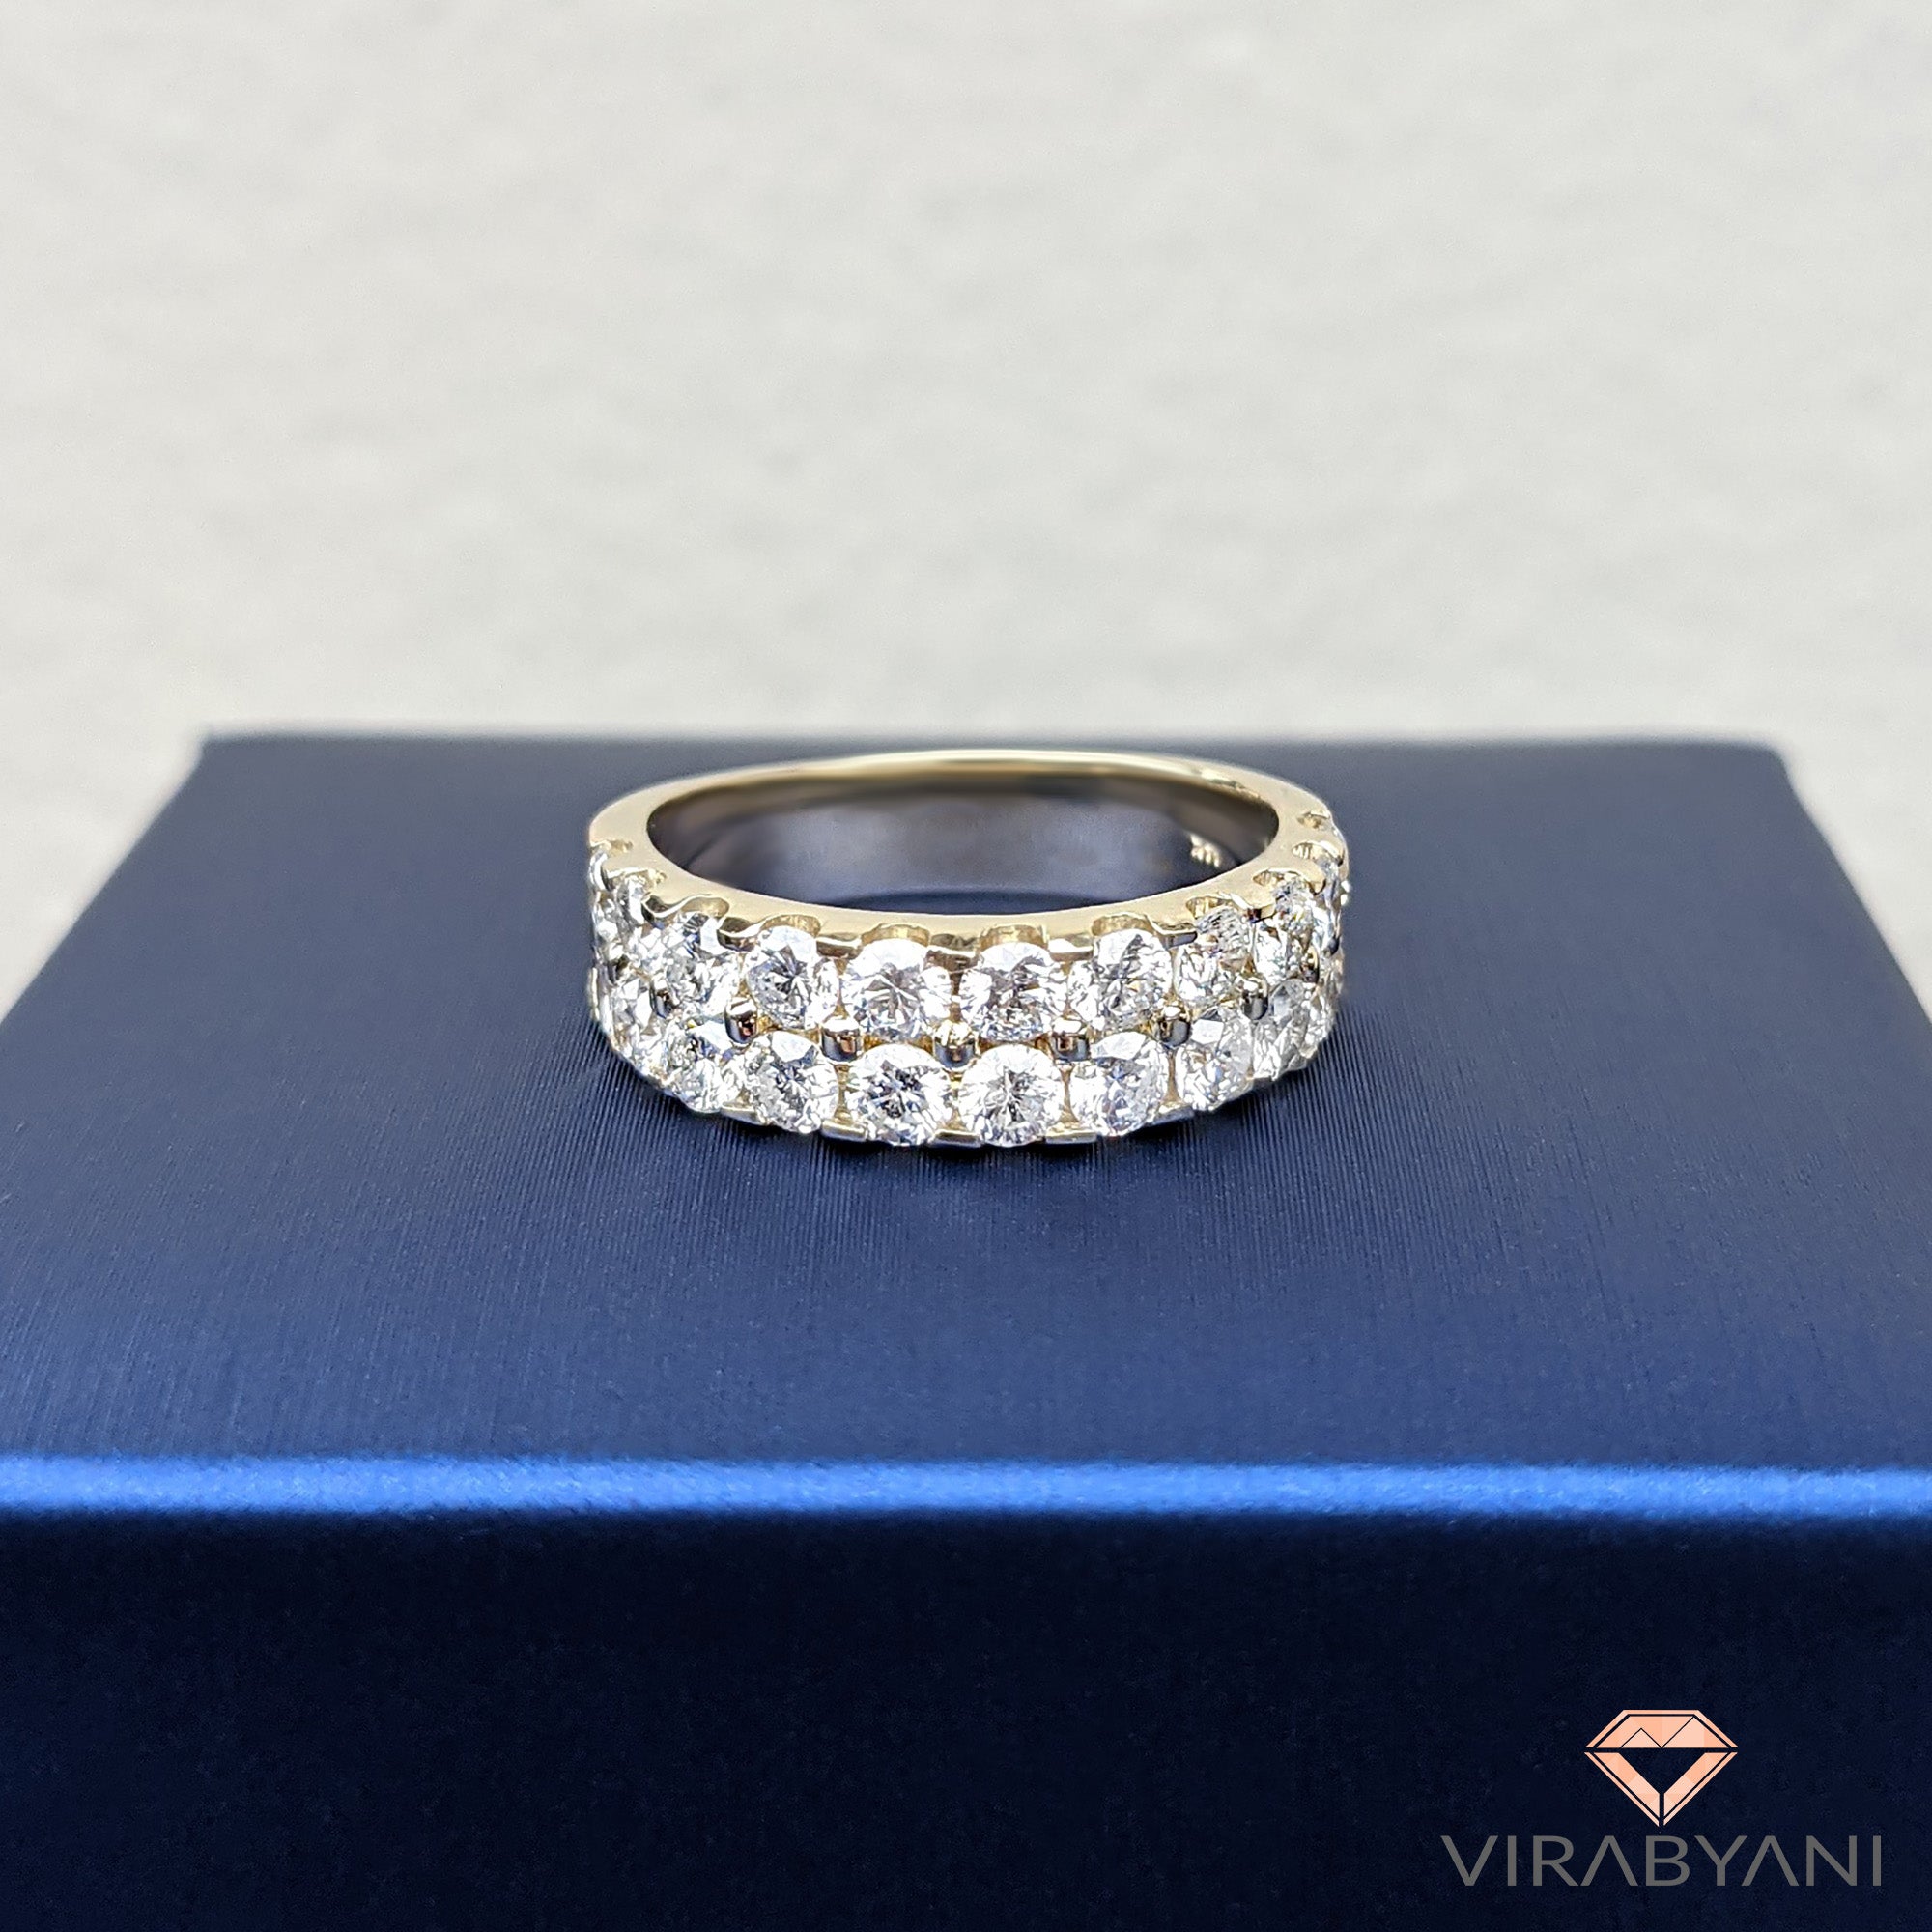 2.00 ct. Diamond Double Row Wedding Band in Solid Gold or Platinum-in 14K/18K White, Yellow, Rose Gold and Platinum - Christmas Jewelry Gift -VIRABYANI